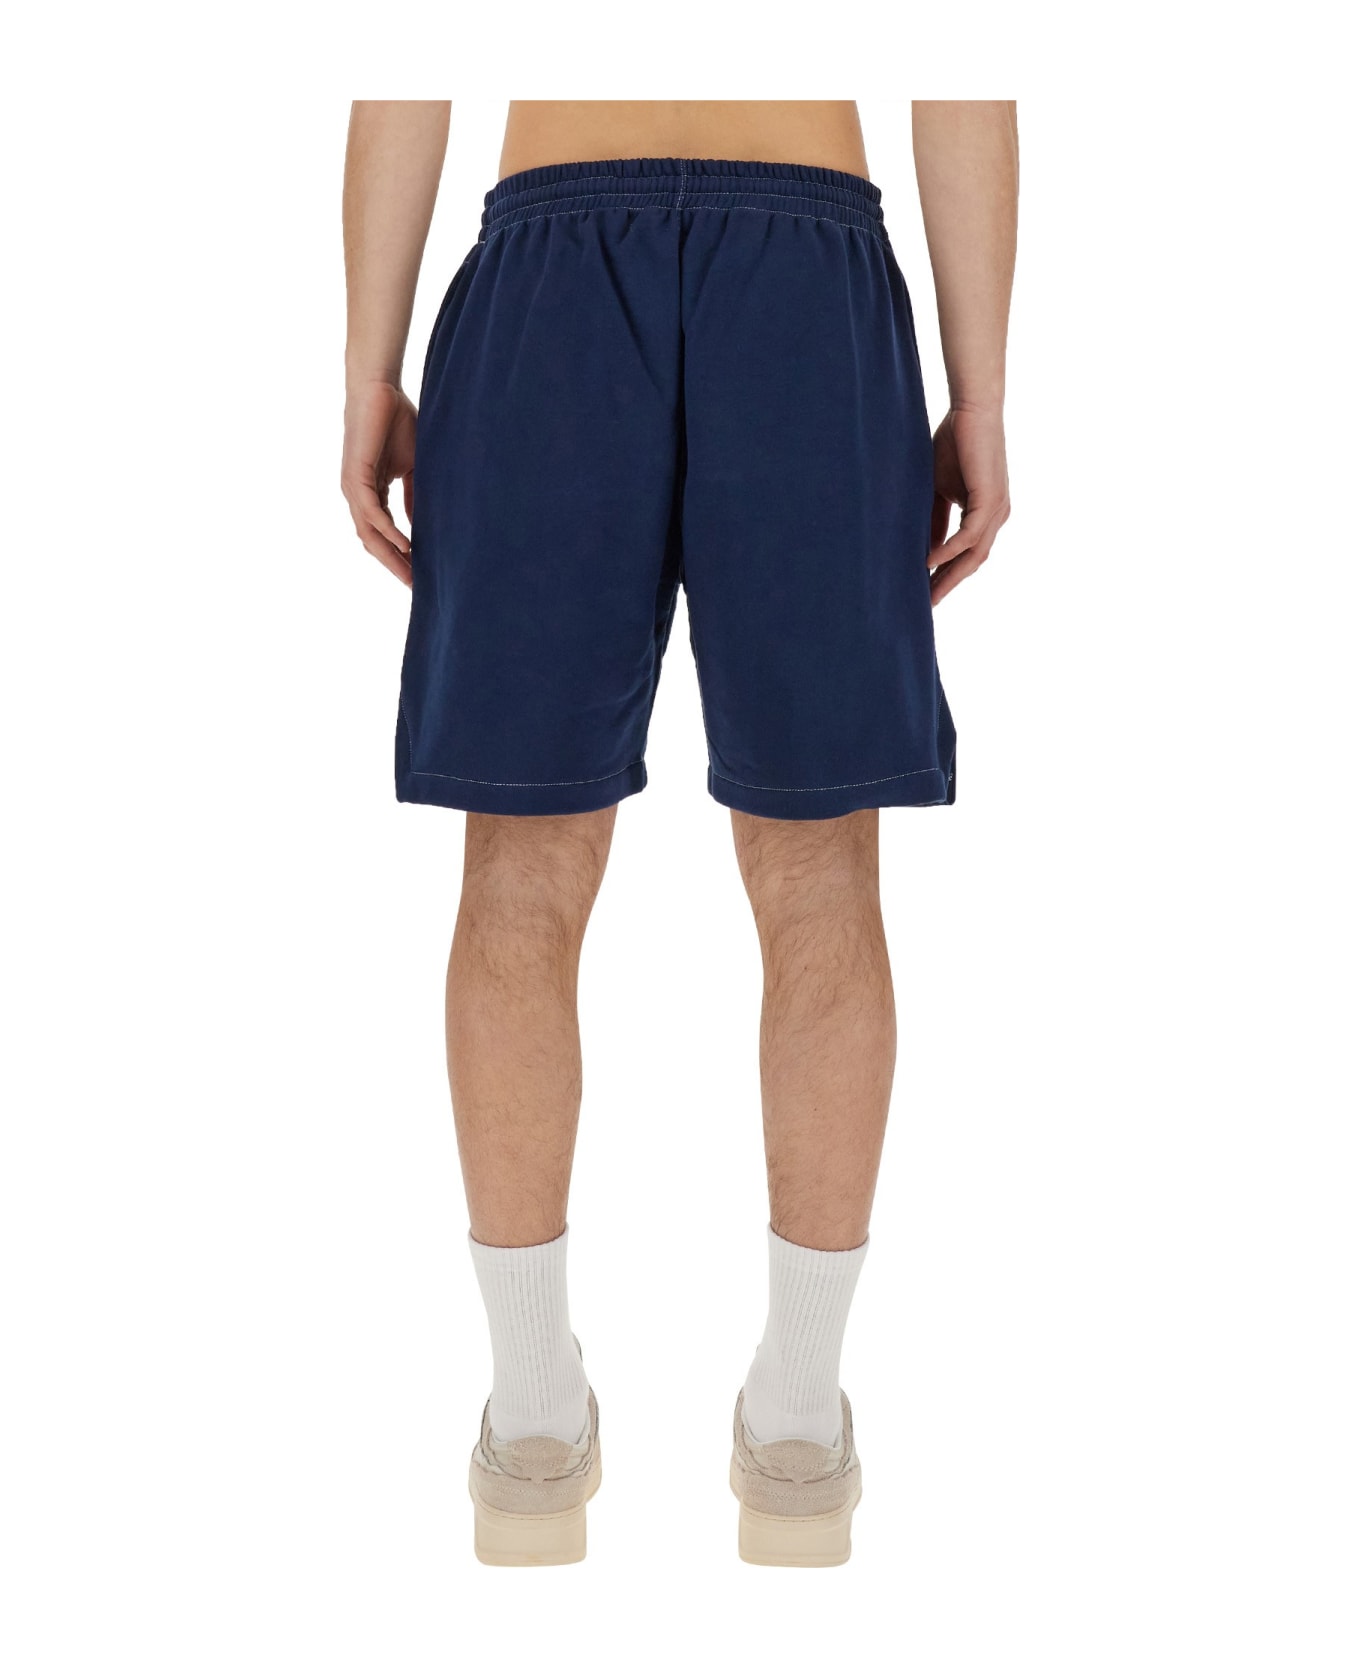 MSGM Bermuda Shorts With Embroidered Logo - Blue